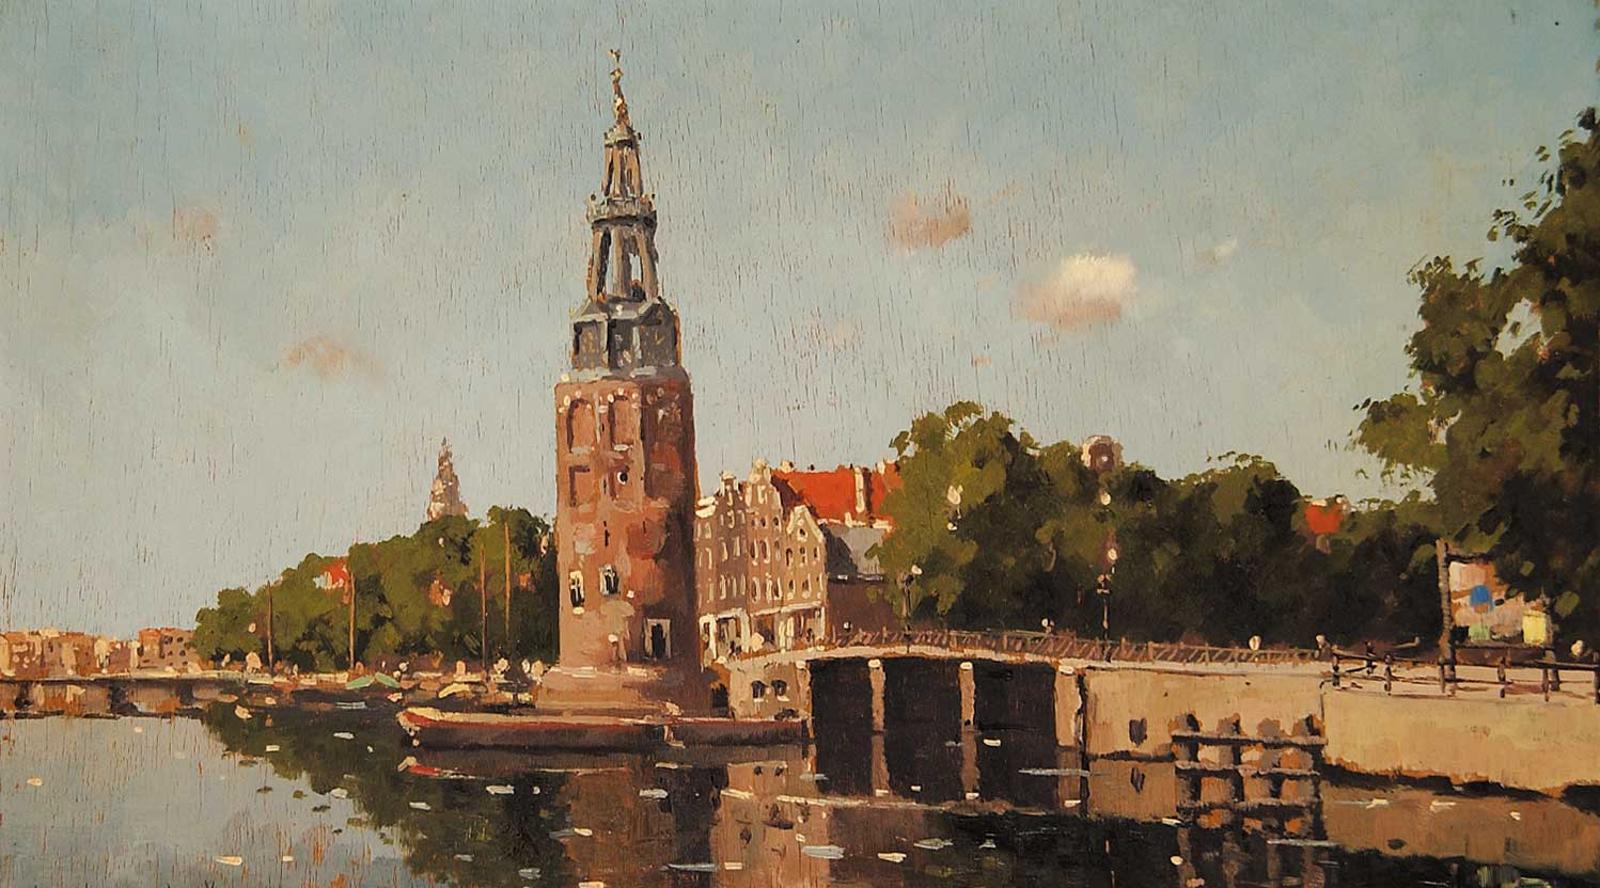 Jan Veenandaal - Untitled - Early View of Amsterdam